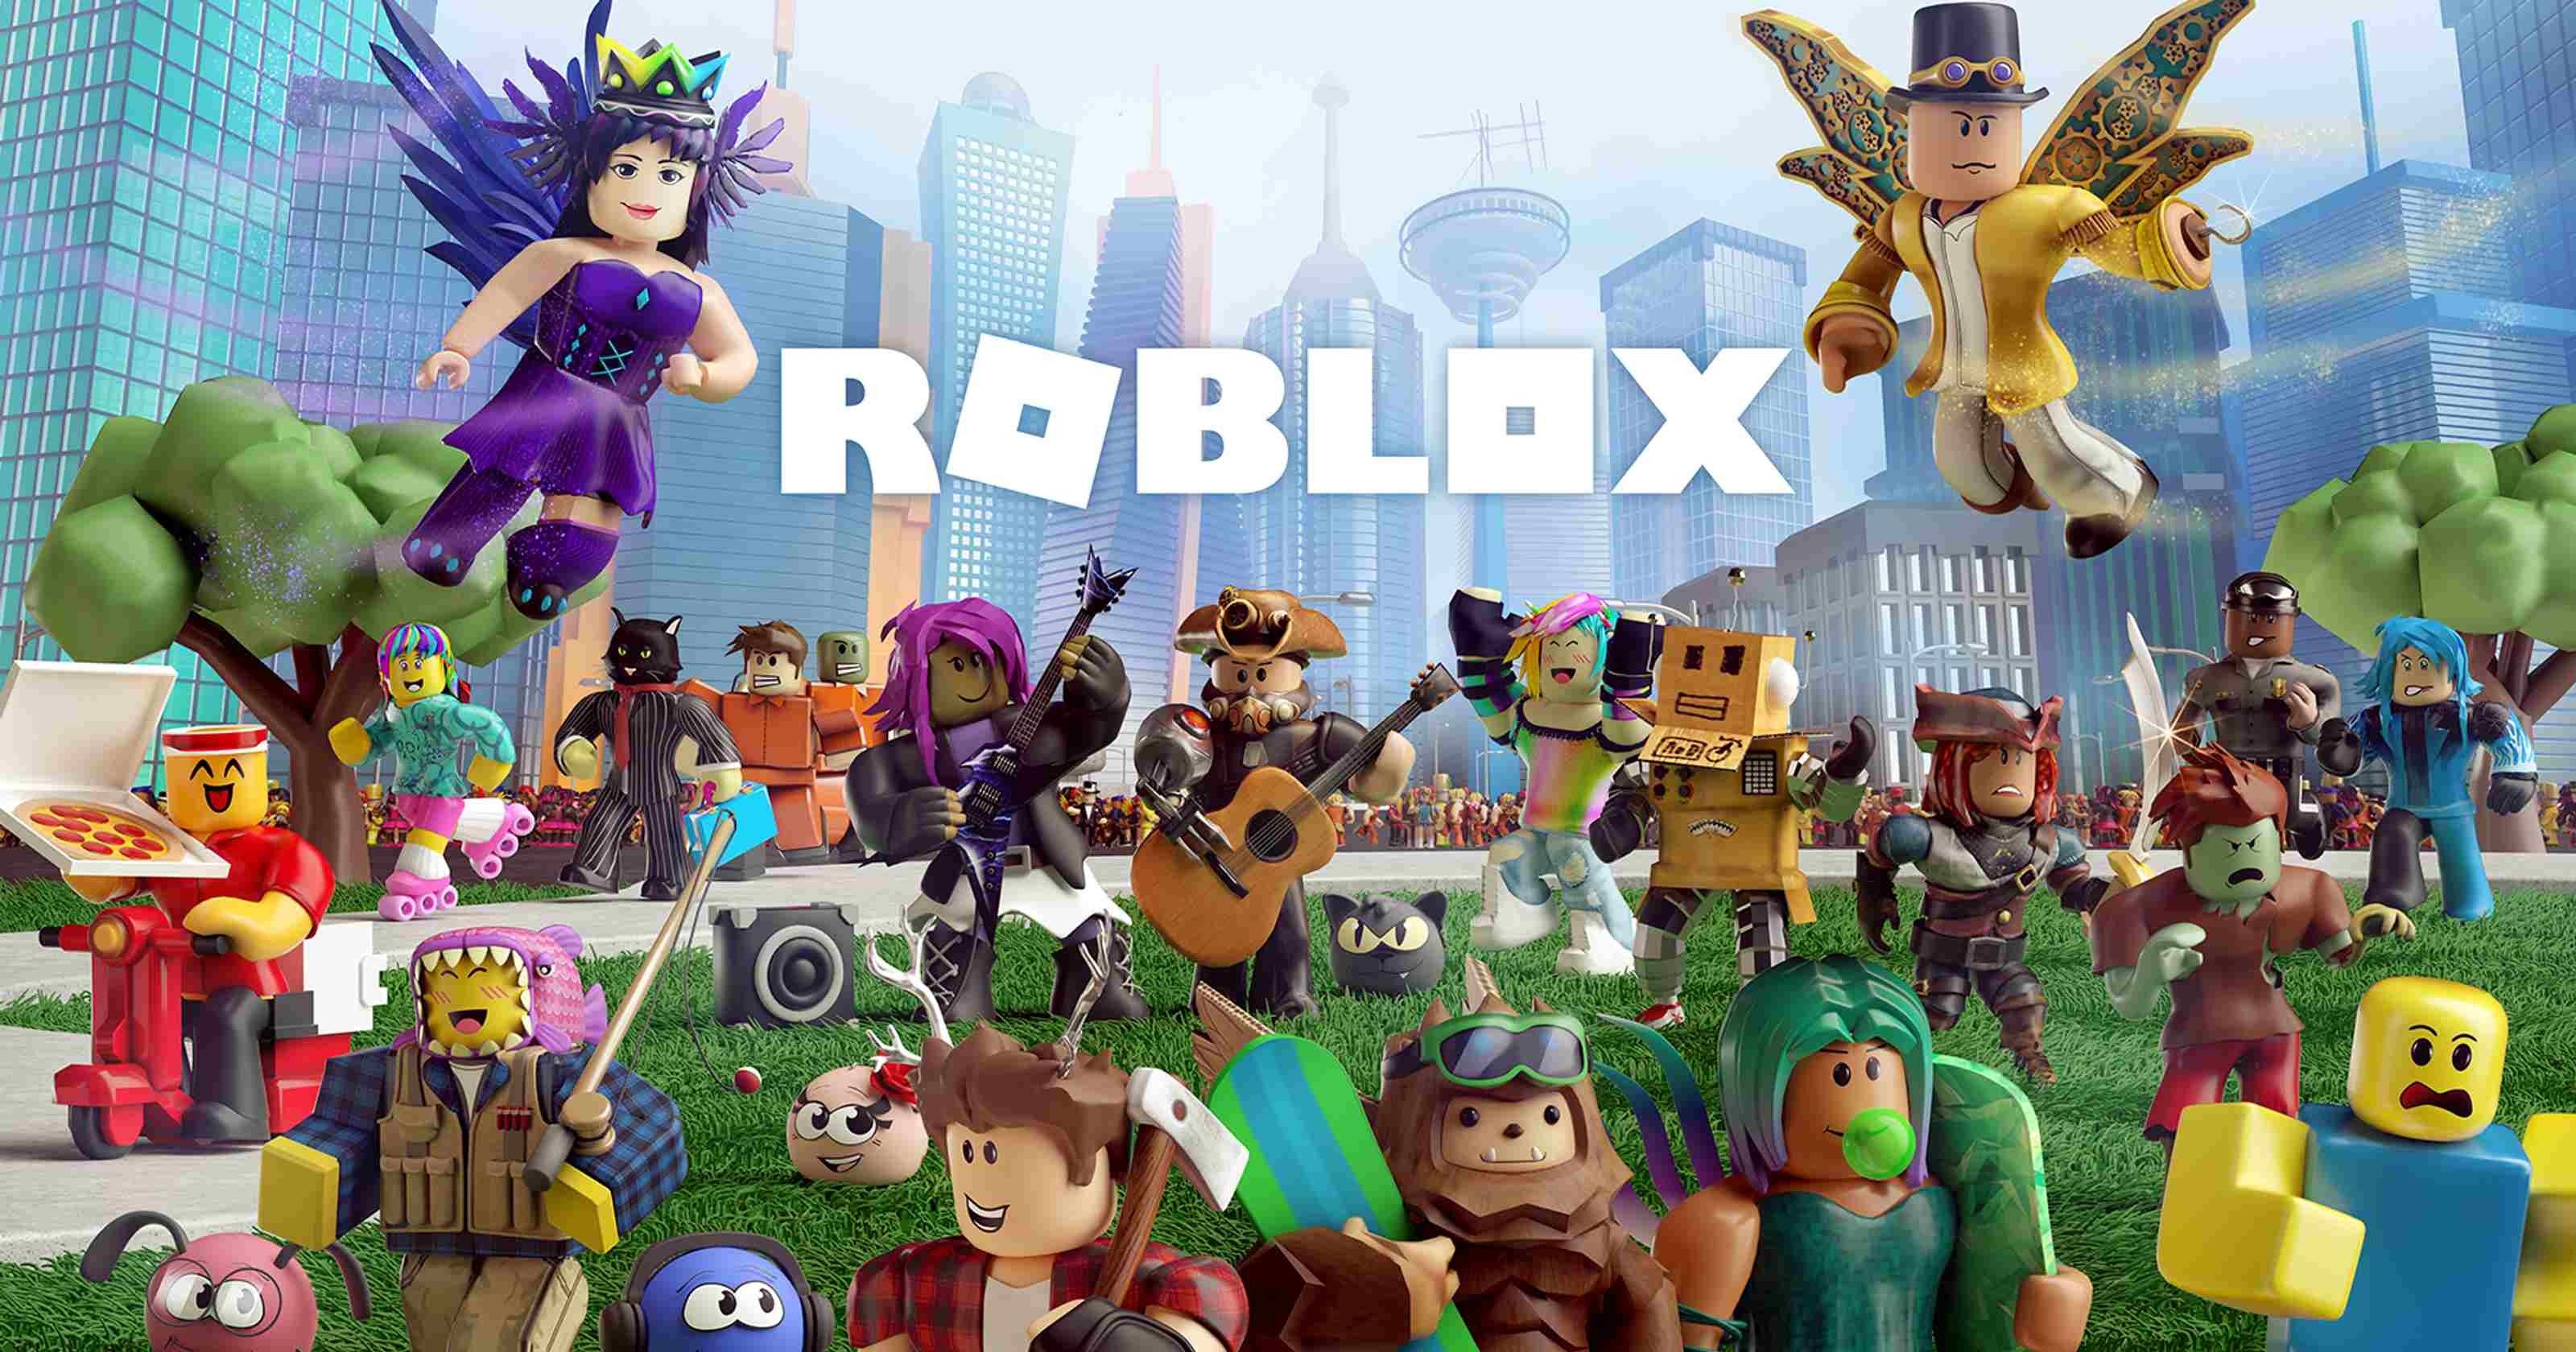 Roblox Girls Wallpapers posted by John Simpson